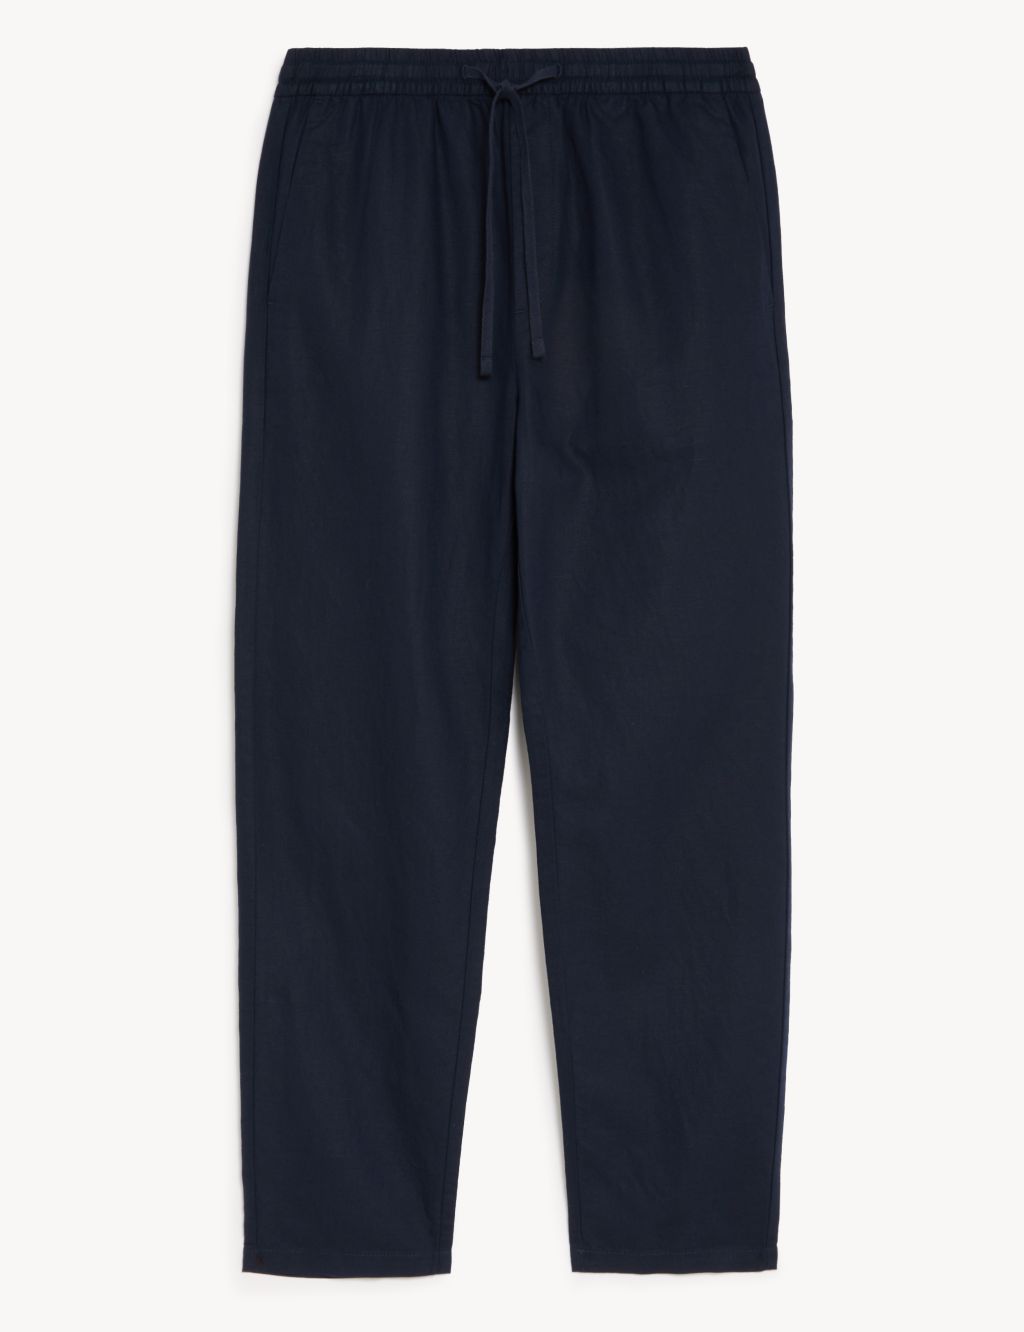 Tapered Fit Linen Blend Trousers image 2